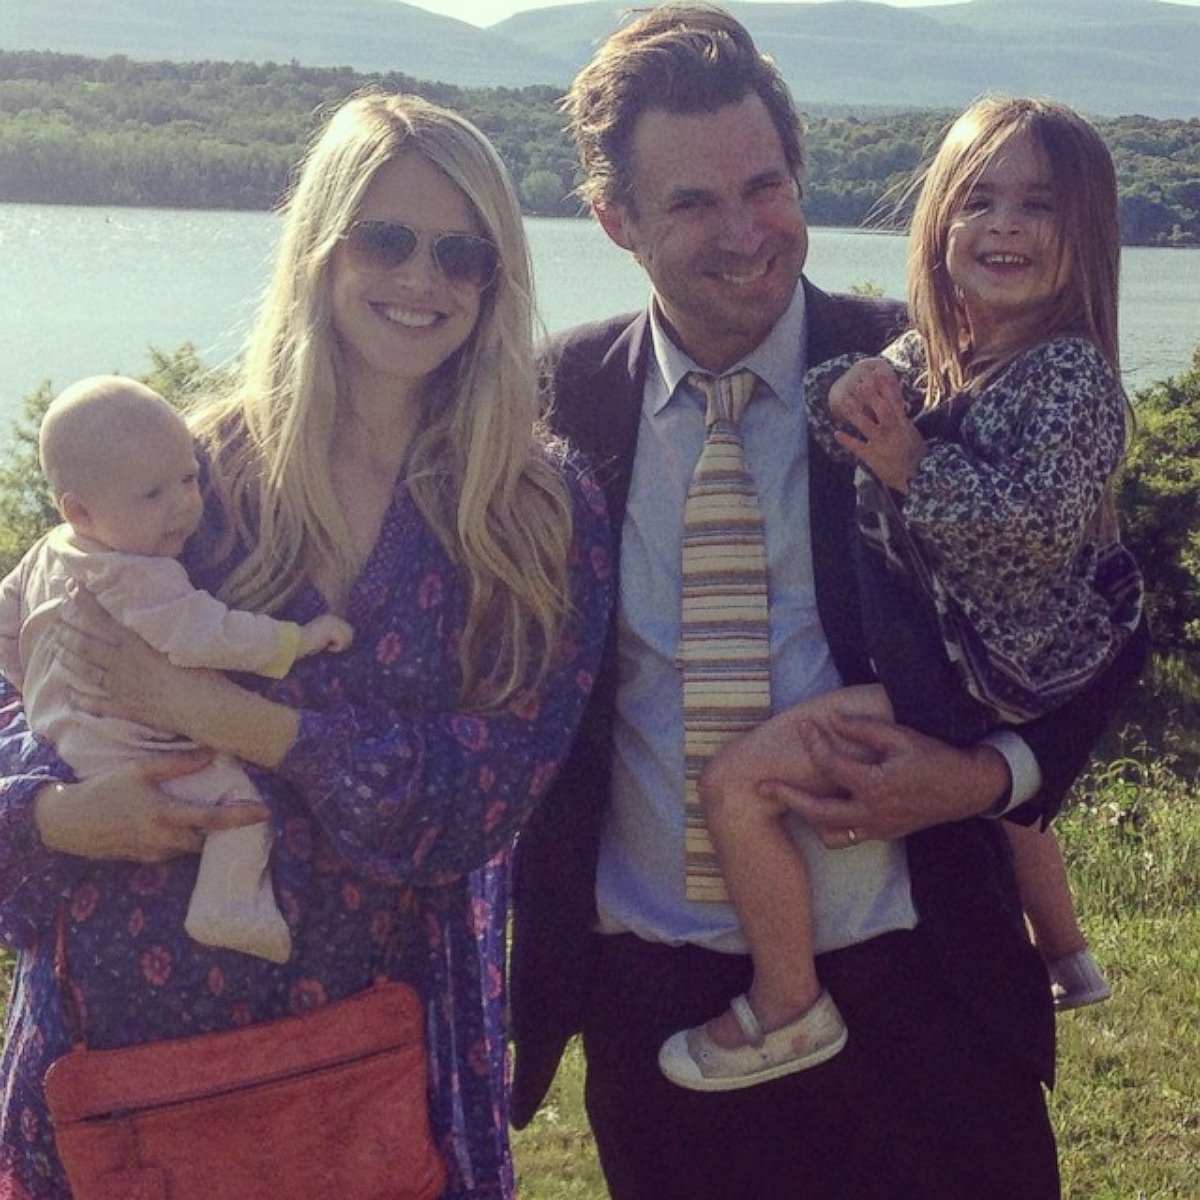 PHOTO: Molly Guy and her family two weeks before the JetBlue incident